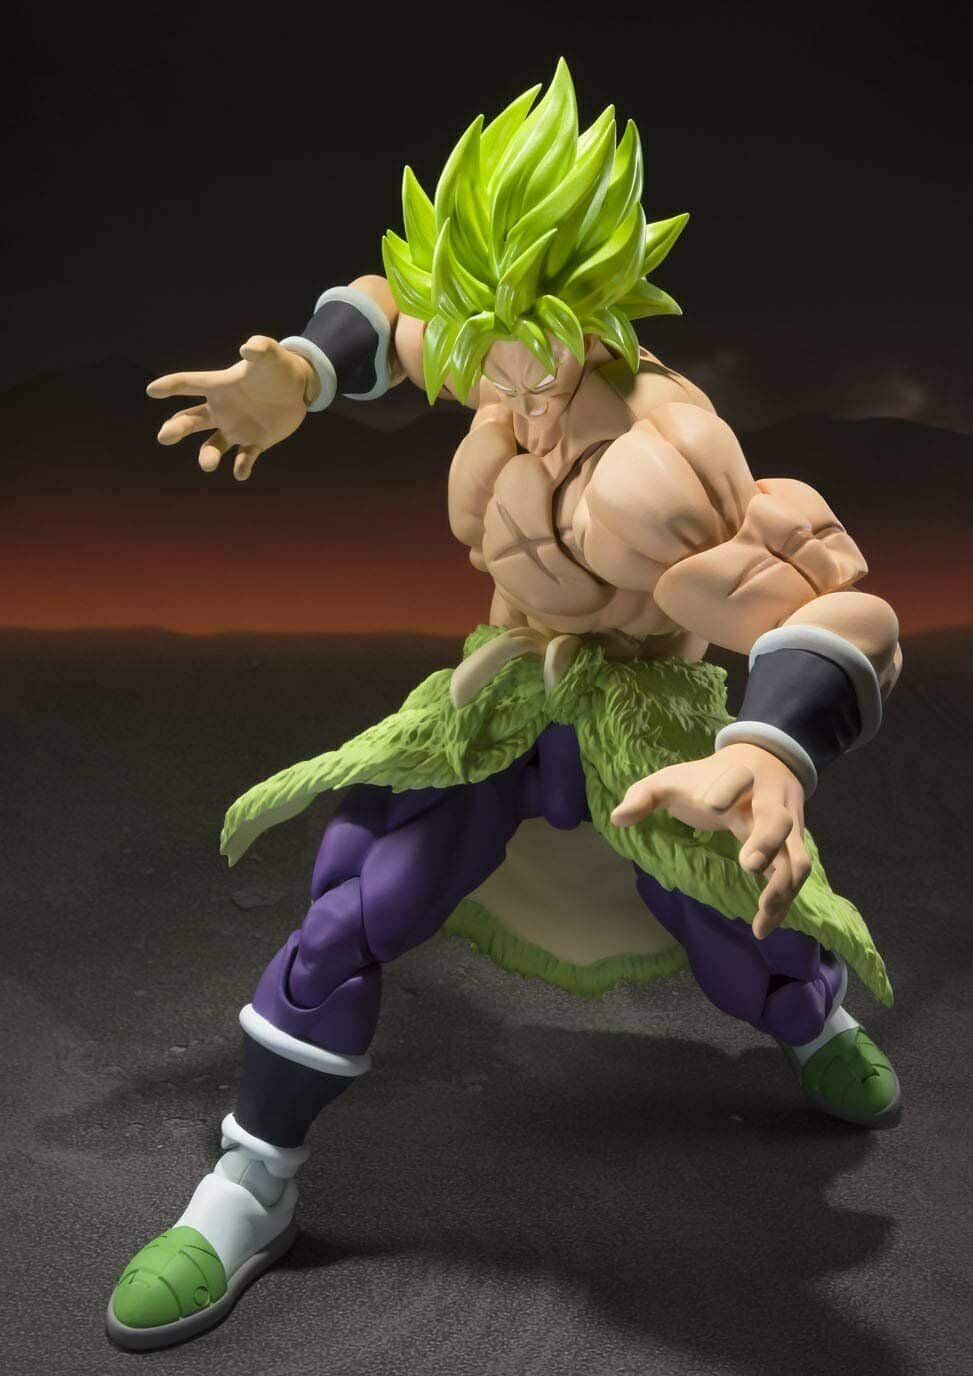 Bandai S.H. Figuarts Dragon Ball Super Broly Full Power Action Figure